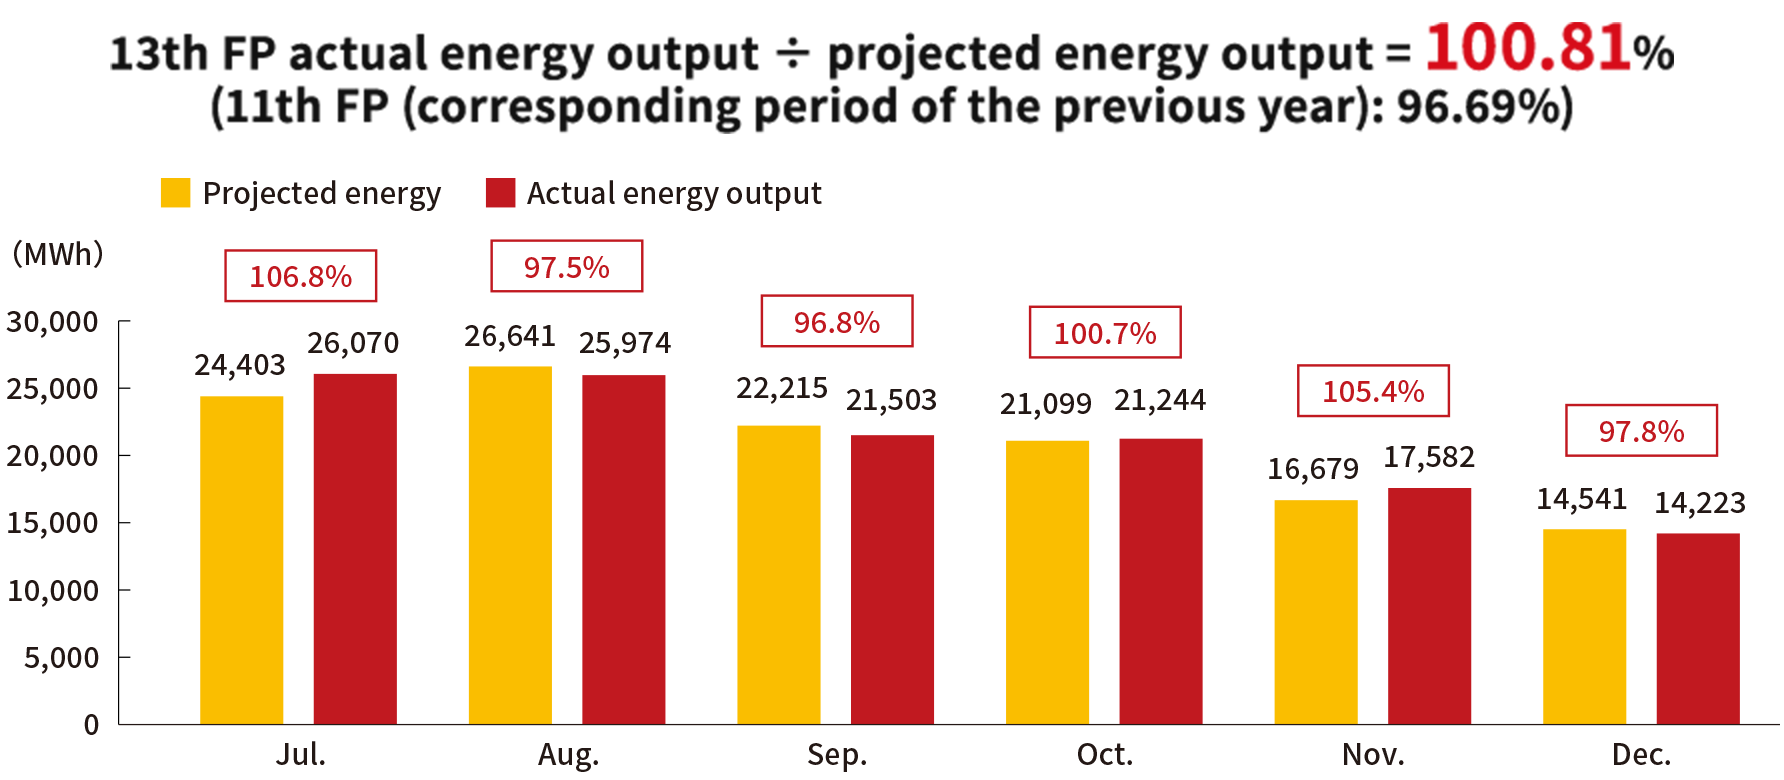 13th FP actual energy output ÷ projected energy output = 100.81% (11th FP (corresponding period of the previous year): 96.69%)